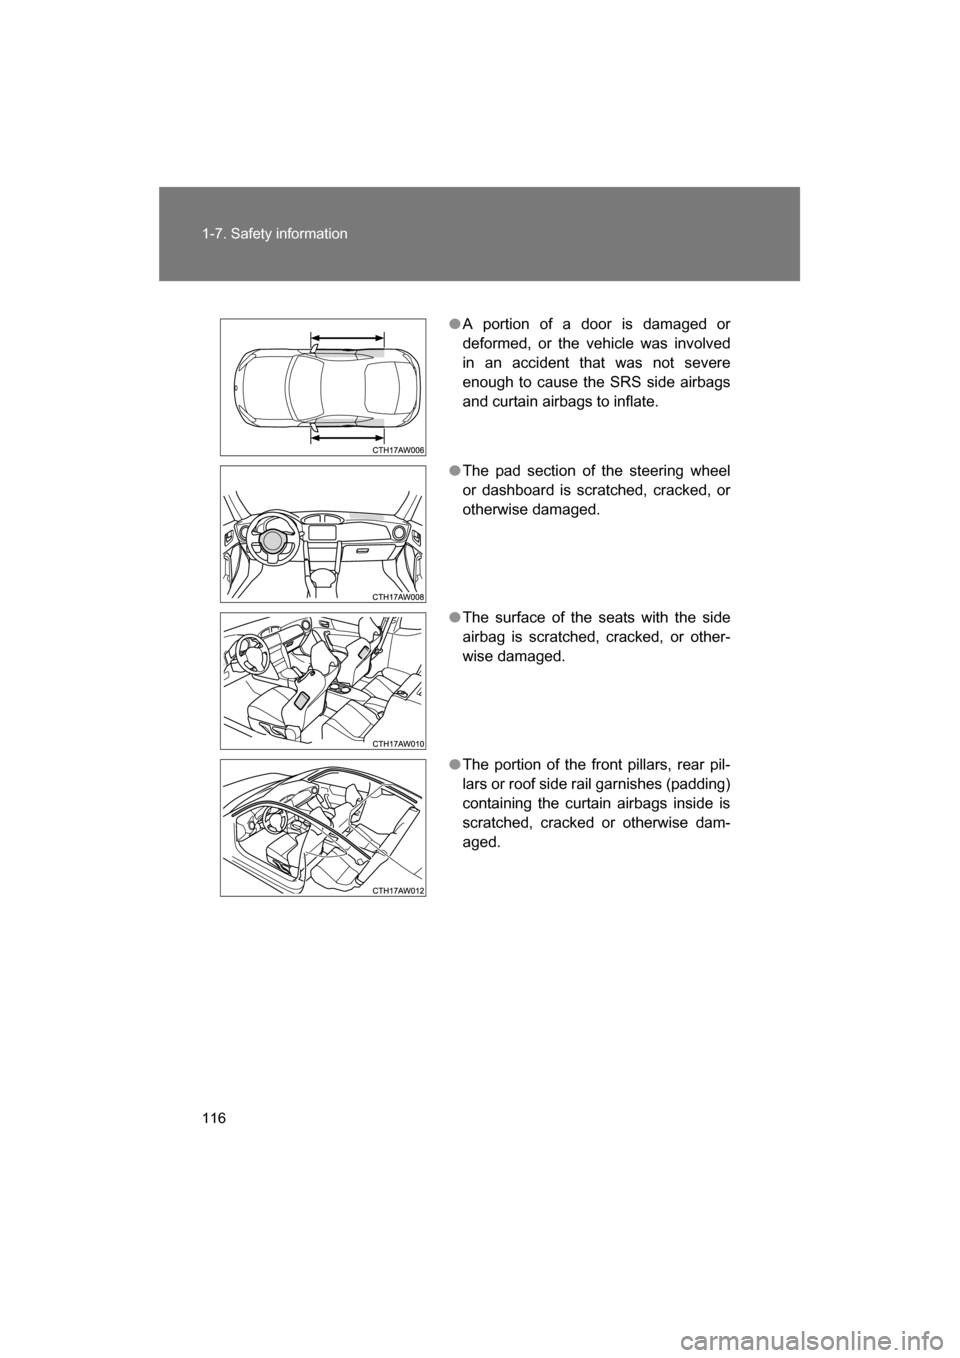 SUBARU BRZ 2014 1.G Owners Manual 116
1-7. Safety information
●A portion of a door is damaged or 
deformed, or the vehicle was involved
in an accident that was not severe
enough to cause the SRS side airbags
and curtain airbags to i